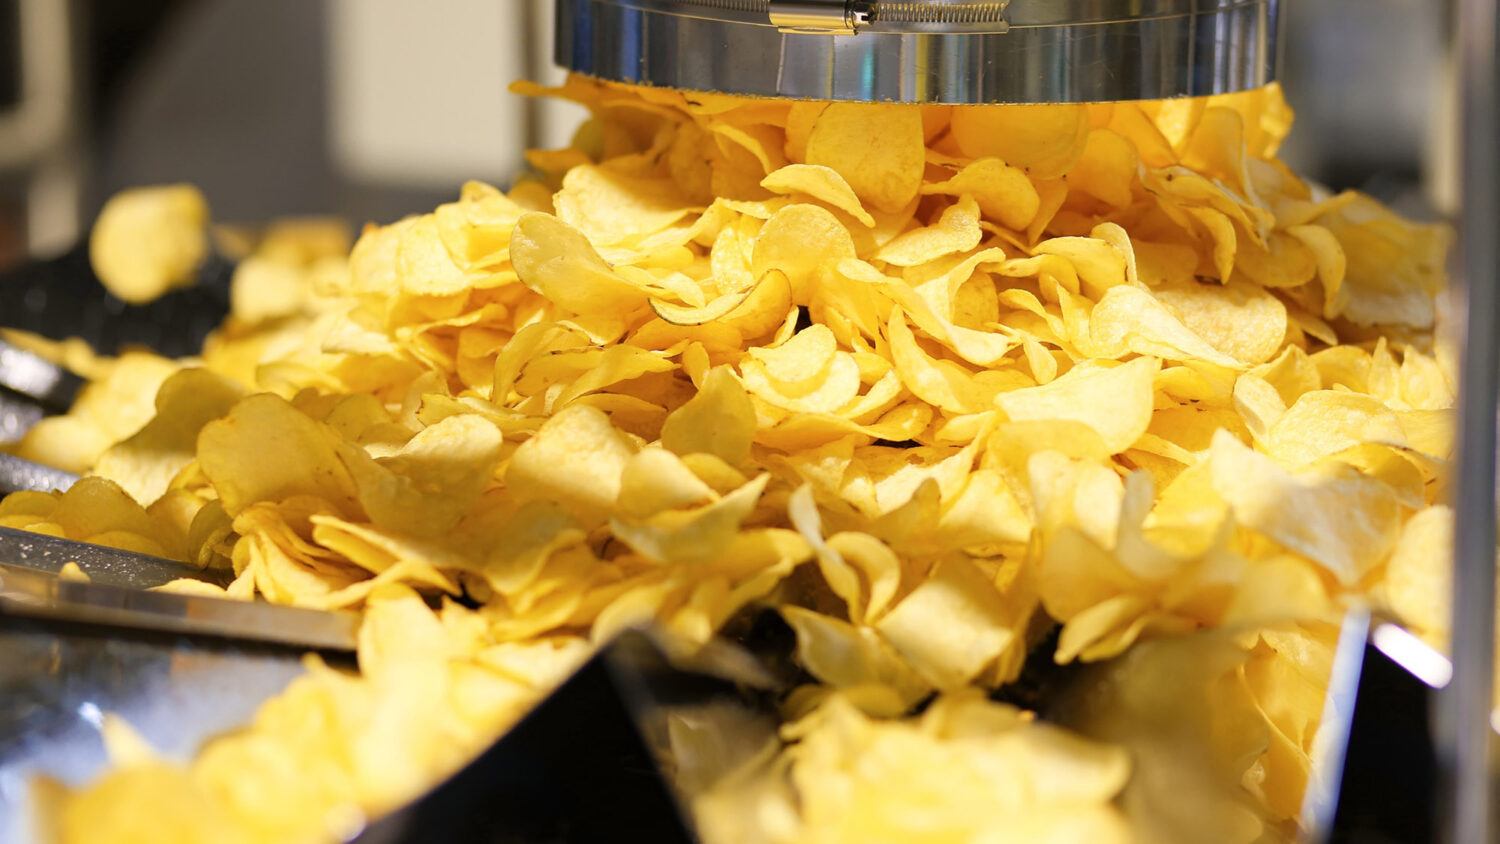 Potato chips production line at the plant. Filling machines for potato chips and snacks.